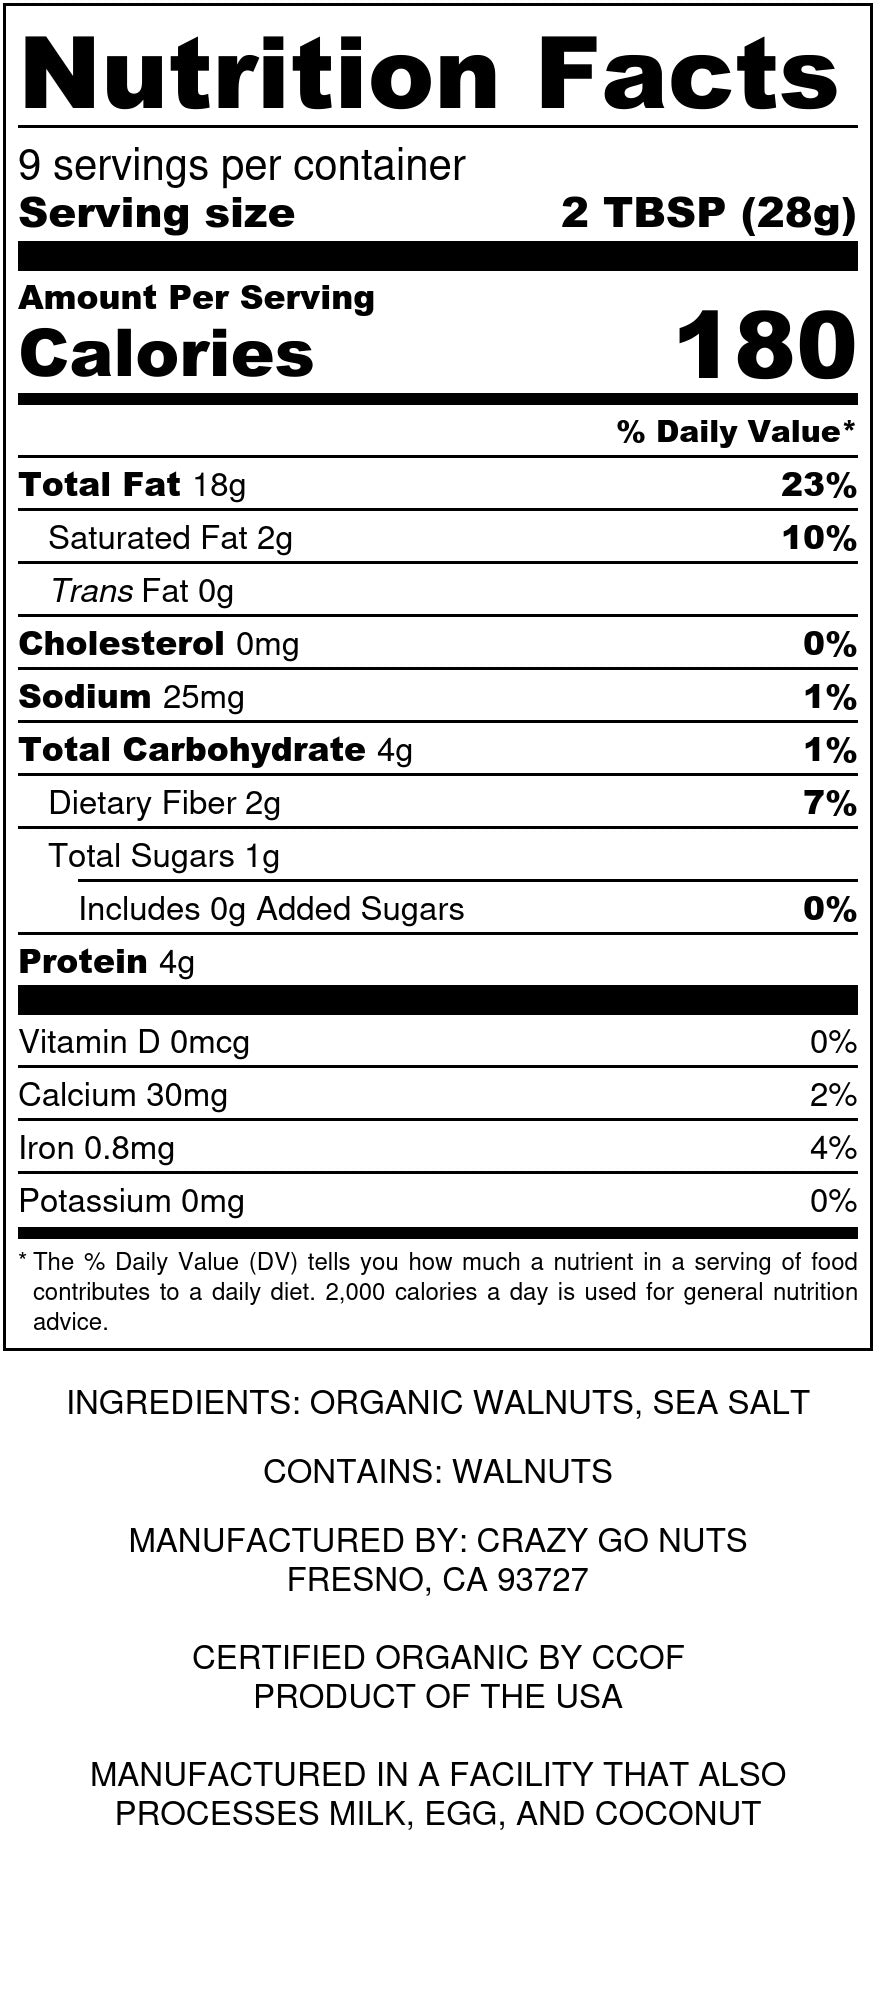 Nutrition panel for organic walnut butter. Ingredients include organic walnuts and sea salt.